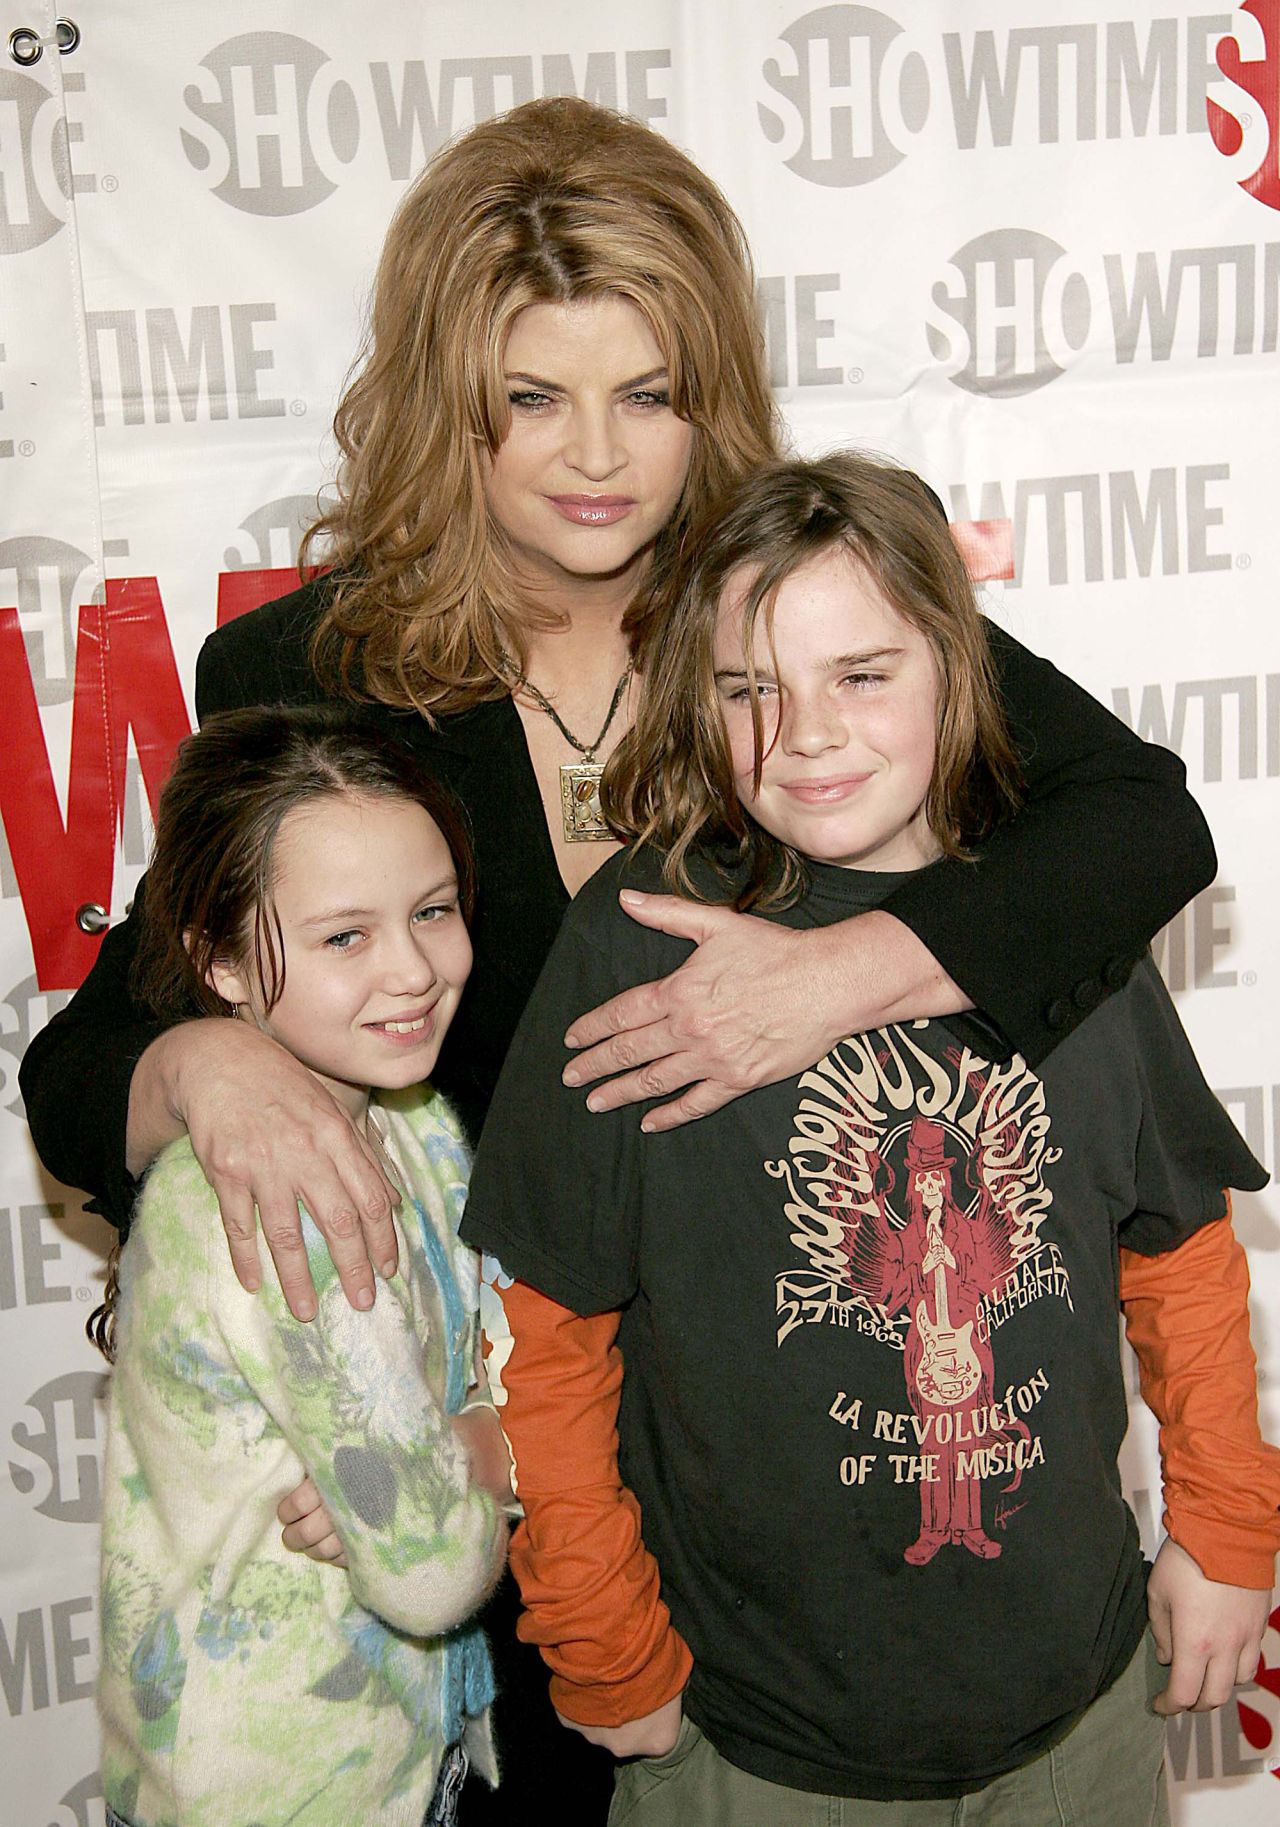 Alley poses with her children Lillie and True at a press event in California in 2005. 